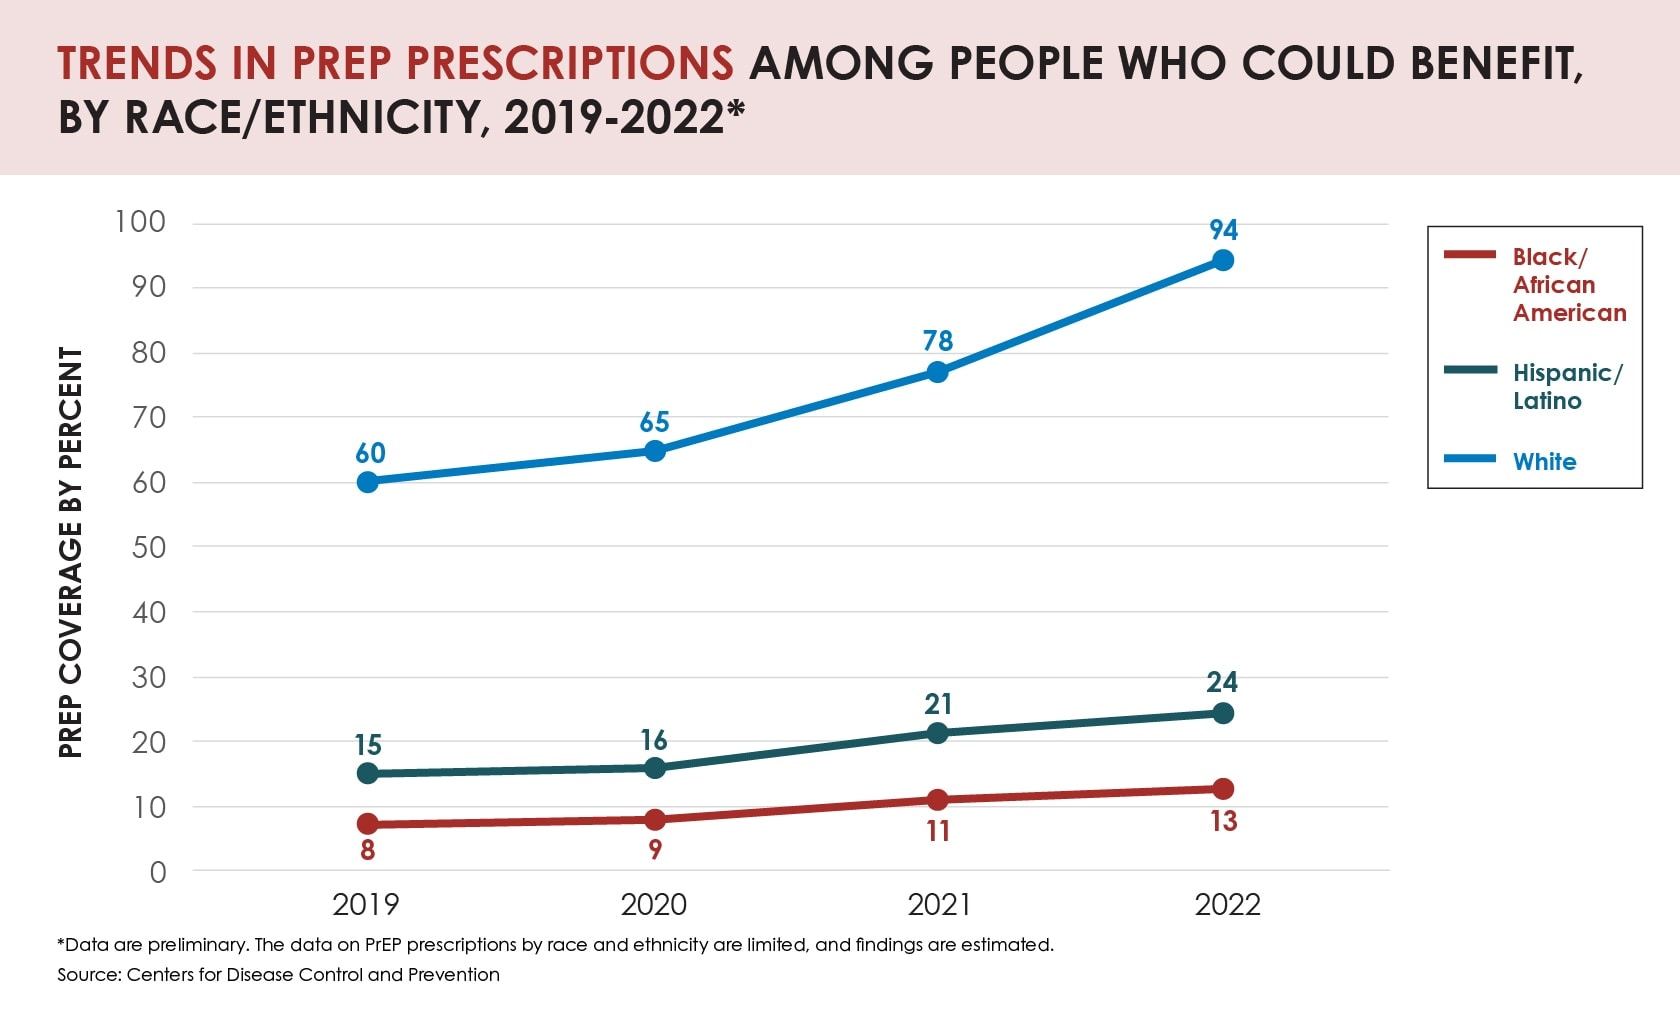 Chart shows 94 percent White people who PrEP would benefit were prescribed, 13 percent Black and 24 percent Latino people.